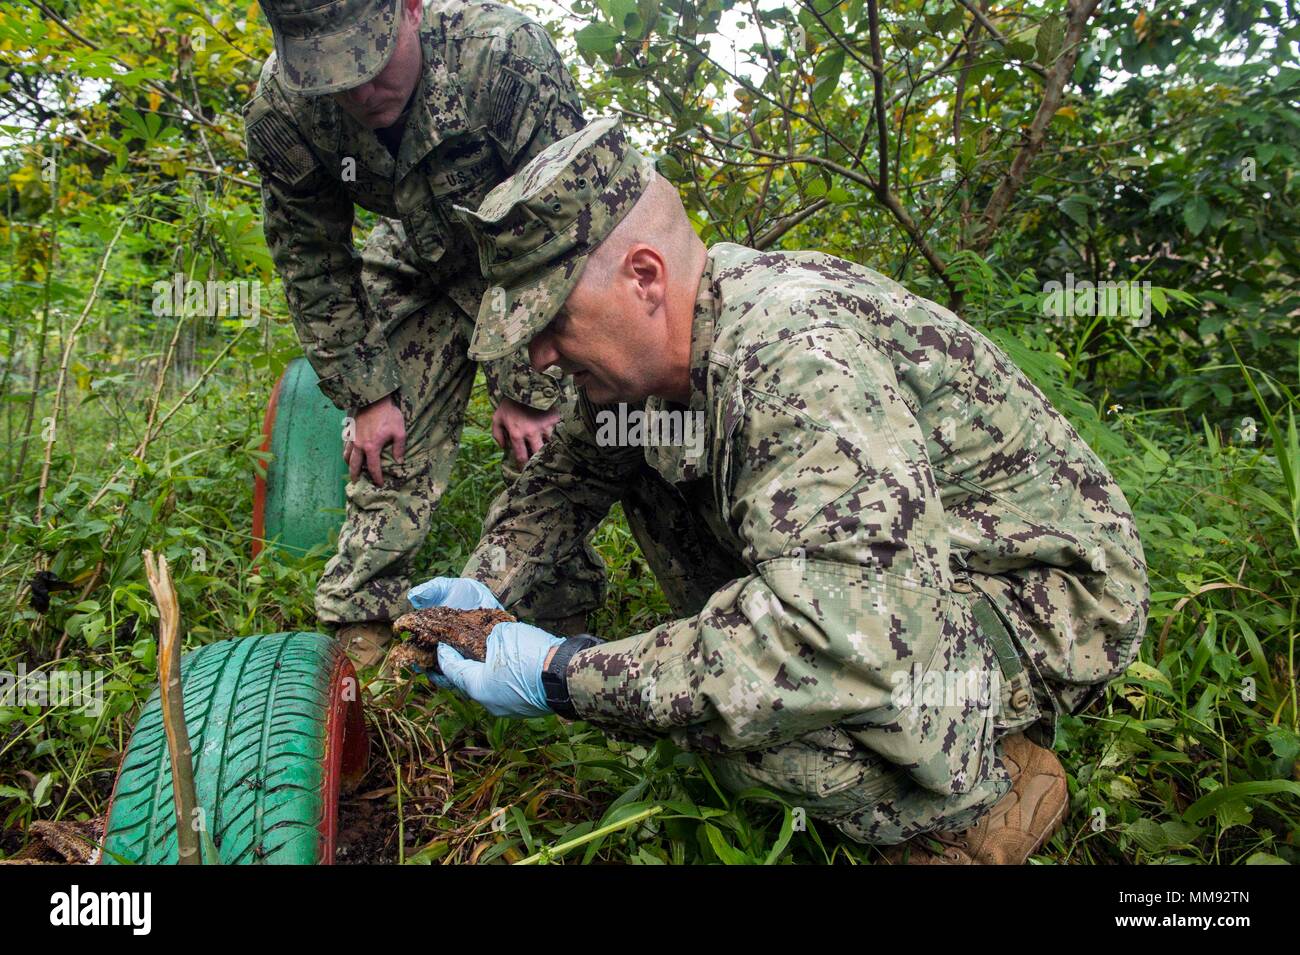 170918-N-YM856-0021 PUERTO BARRIOS, Guatemala (Sept. 18, 2017) Lt. Cmdr. Ian Sutherland, right, technical director for the Navy Entomology Center of Excellence, and Construction Electrician Constructionman Thomas Bautz, assigned to Naval Mobile Construction Battalion 1, examine a killer bee hive after treating it with insecticide at Centro De Atención Mis Años Dorados, a local nursing home, during Southern Partnership Station 17 (SPS 17). SPS 17 is a U.S. Navy deployment executed by U.S. Naval Forces Southern Command/U.S. 4th Fleet, focused on subject matter expert exchanges with partner natio Stock Photo